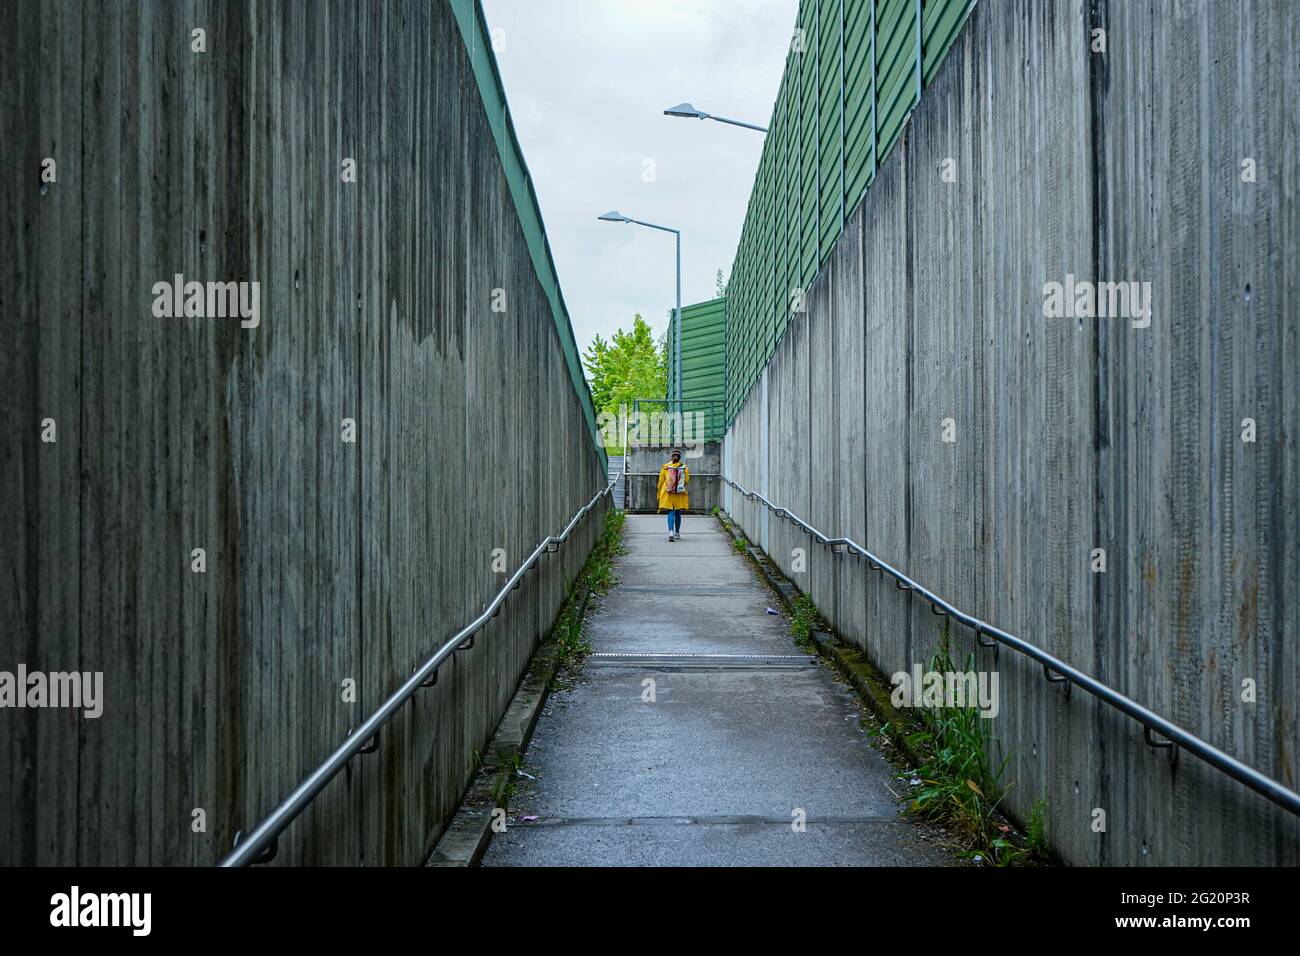 A woman in a yellow rain jacket walks from a station through a narrow footpath with high stone walls to the street. Stock Photo